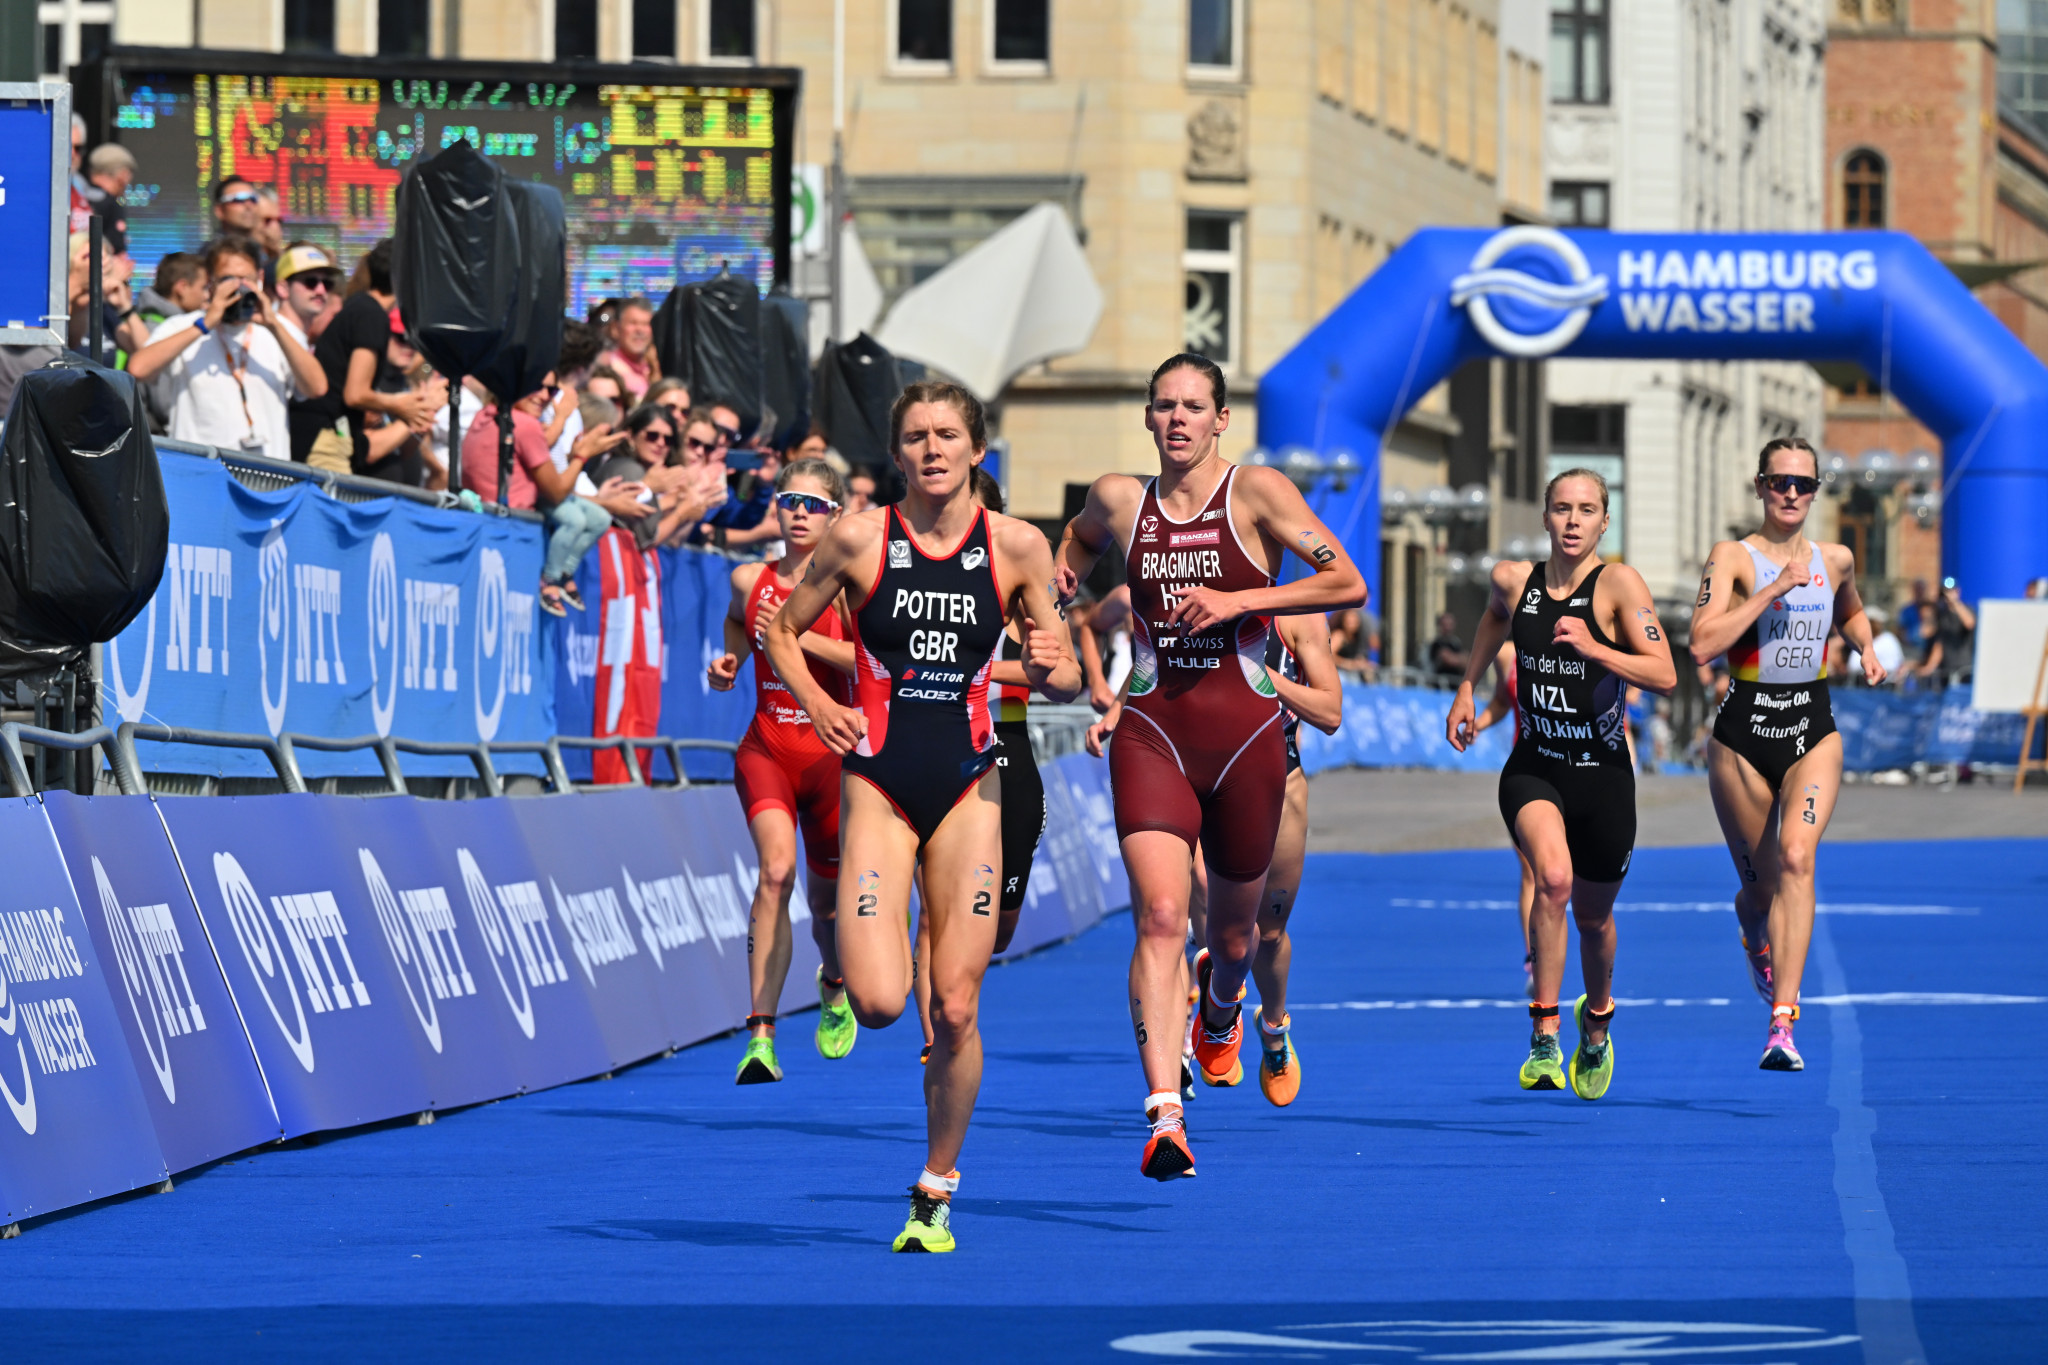 Beth Potter finished first in the initial women's qualifier by a whisker as she looks to win her third gold medal on the World Triathlon Championship Series this season after triumphs in Abu Dhabi and Montreal ©World Triathlon